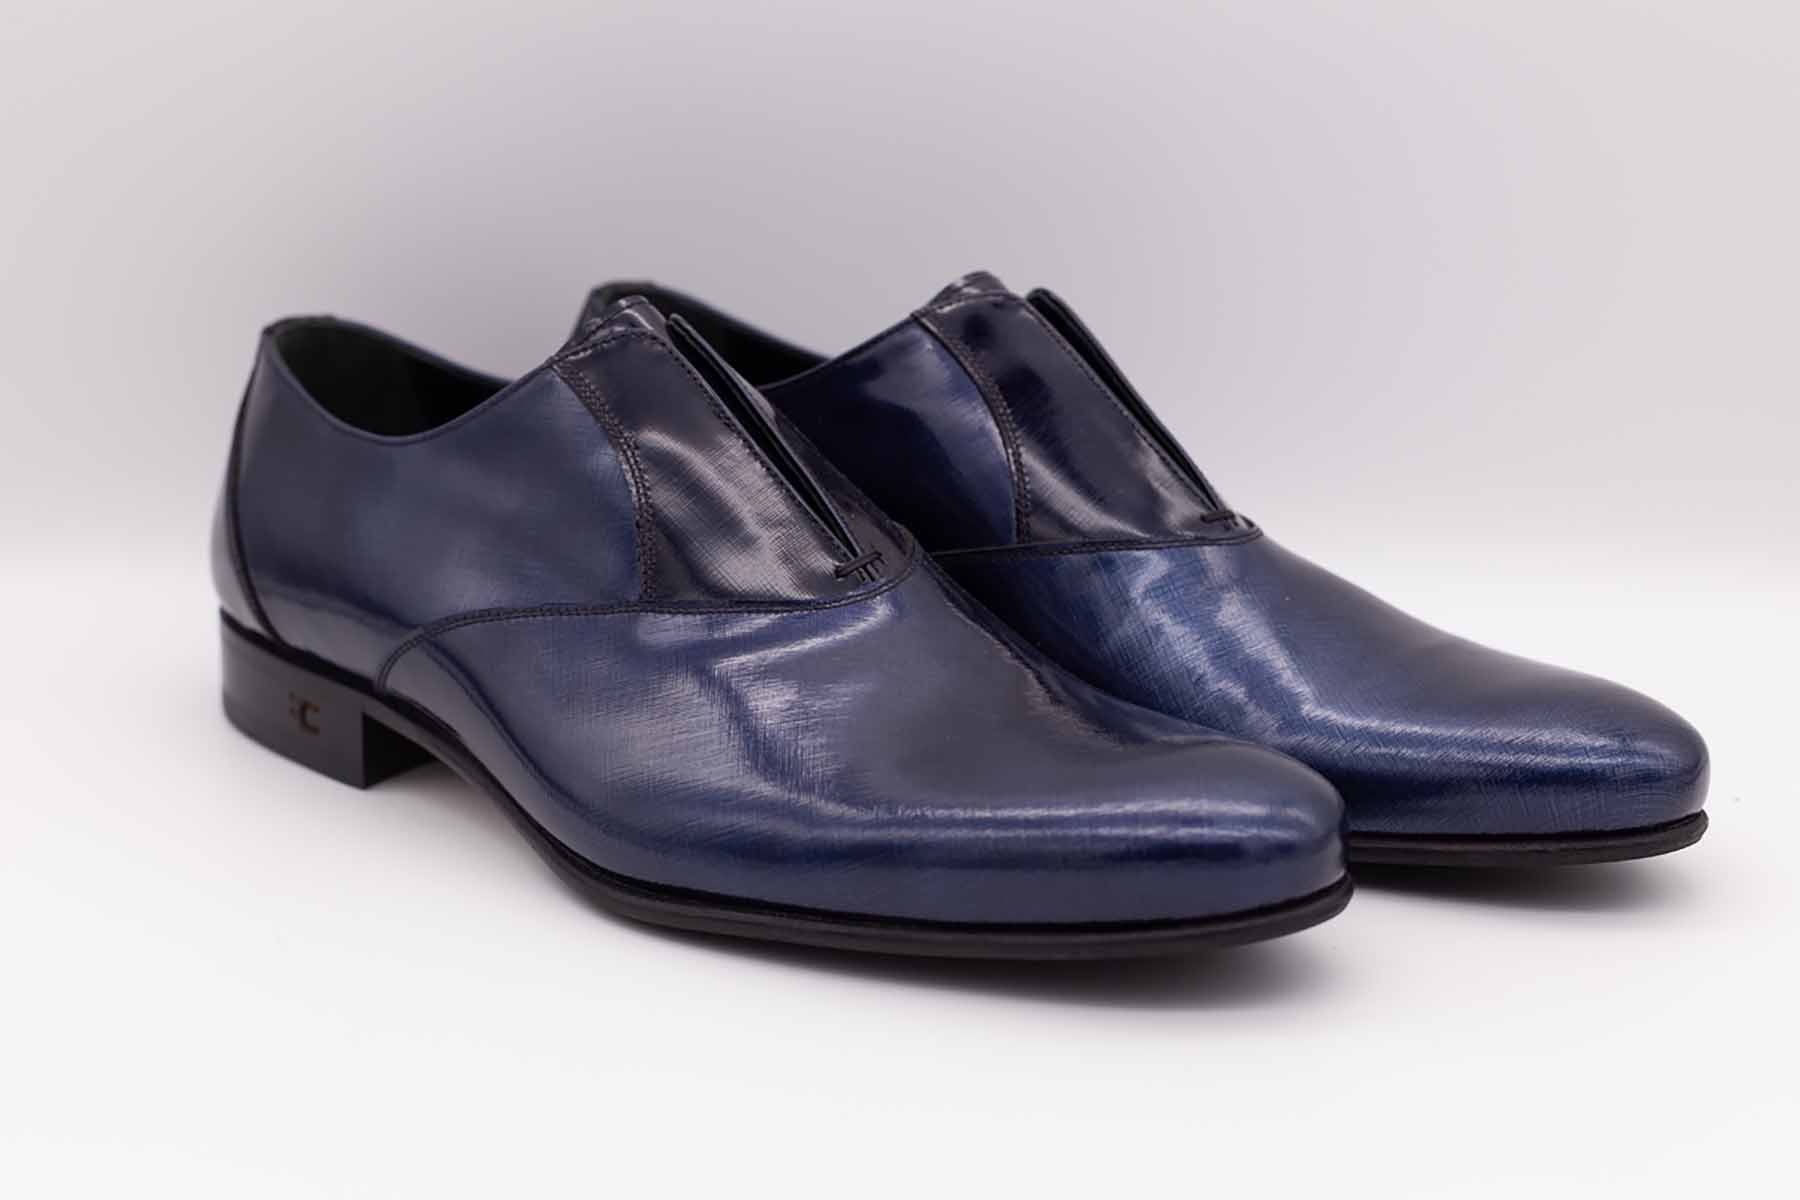 Navy blue shoe slippers classic blue black wedding suit 100% made in Italy